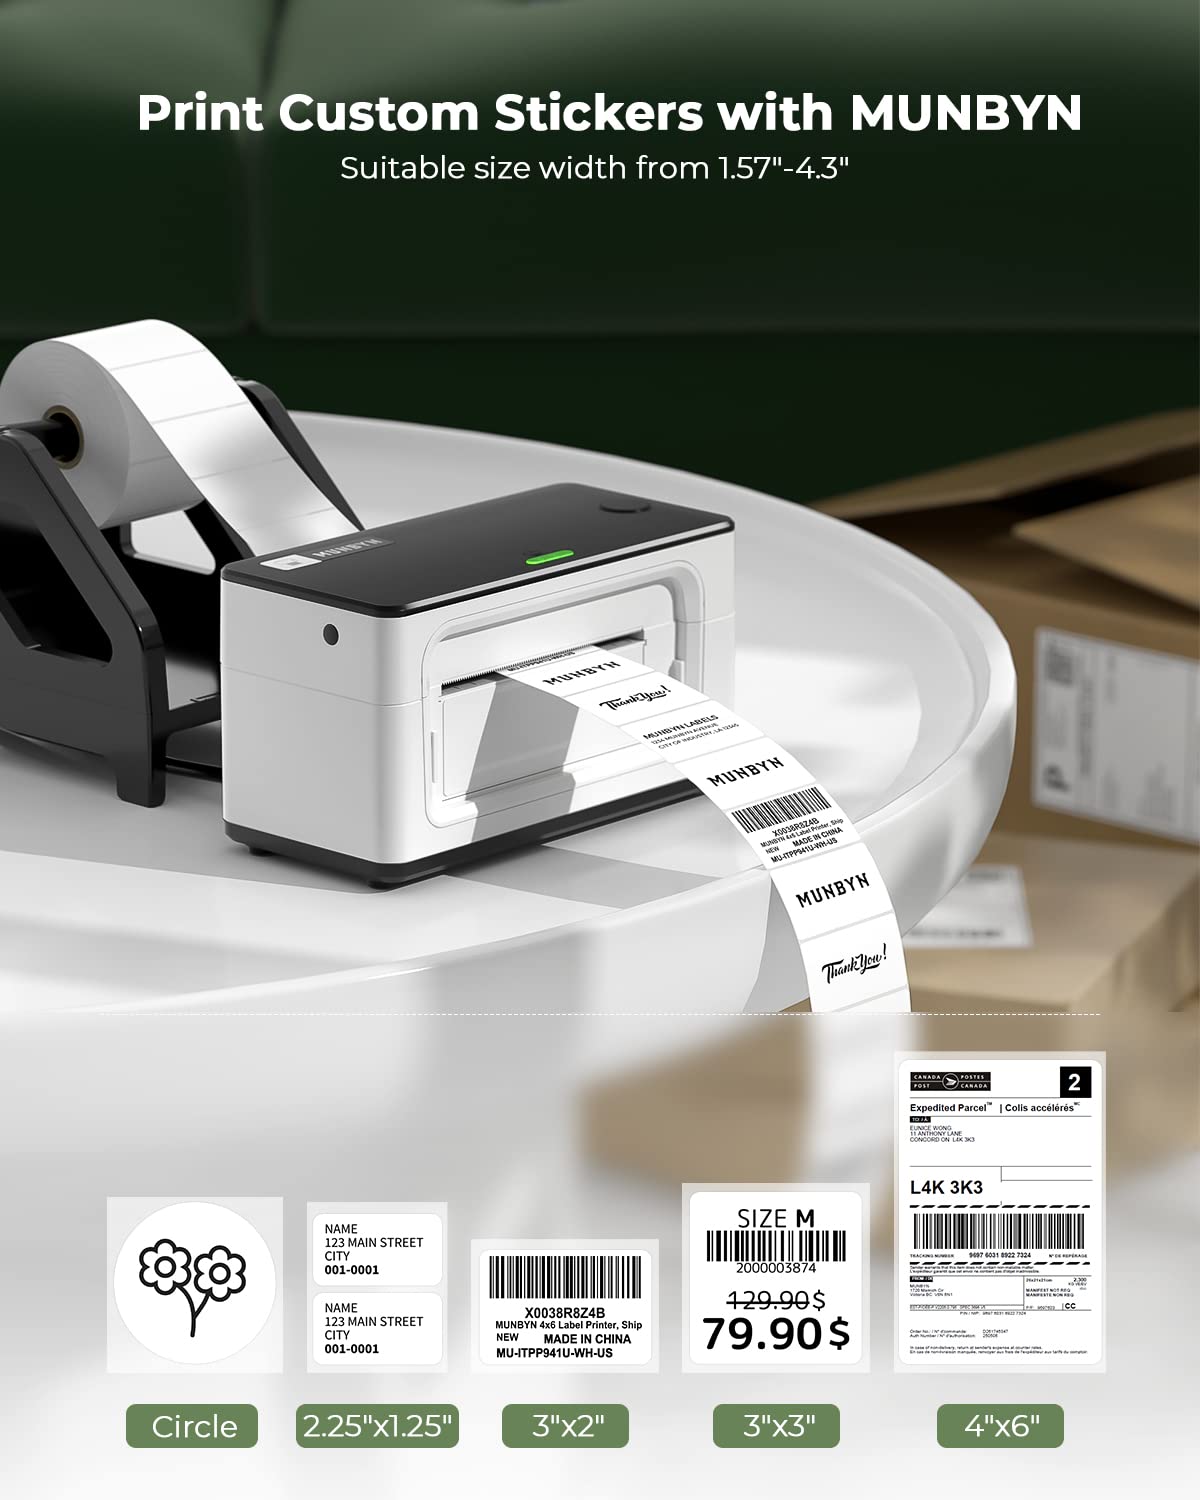 Shipping Label Printer, 4x6 Label Printer for Shipping Packages, USB  Thermal Printer for Shipping Labels Home Small Business, with Software for Instant  Conversion from 8x11 to 4x6 Labels